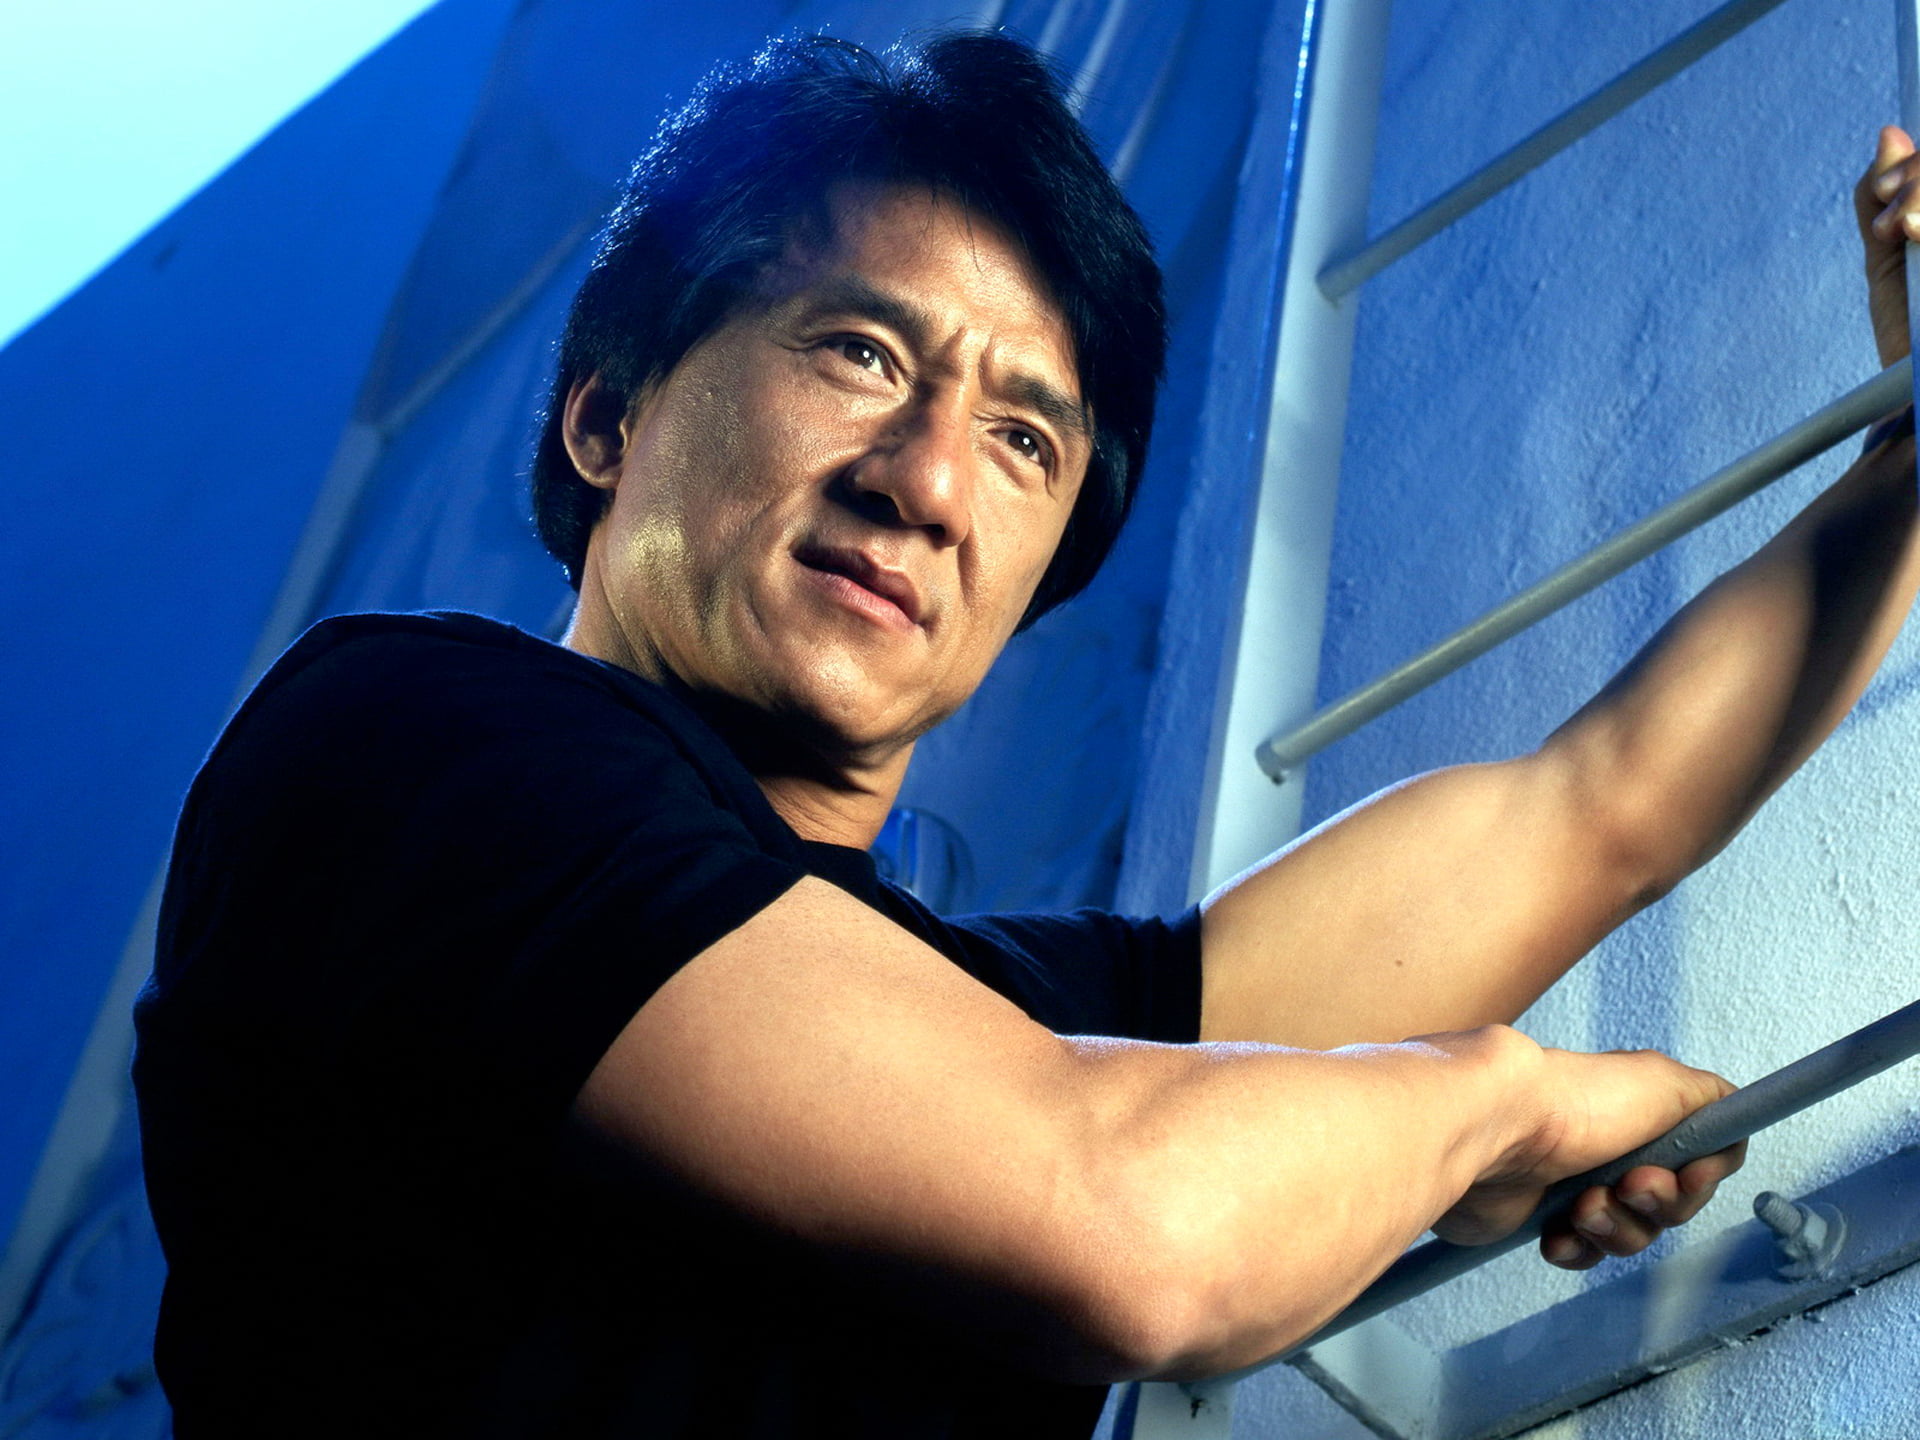 Jackie Chan, actor, singer, martial arts, Comedy, militants, one person